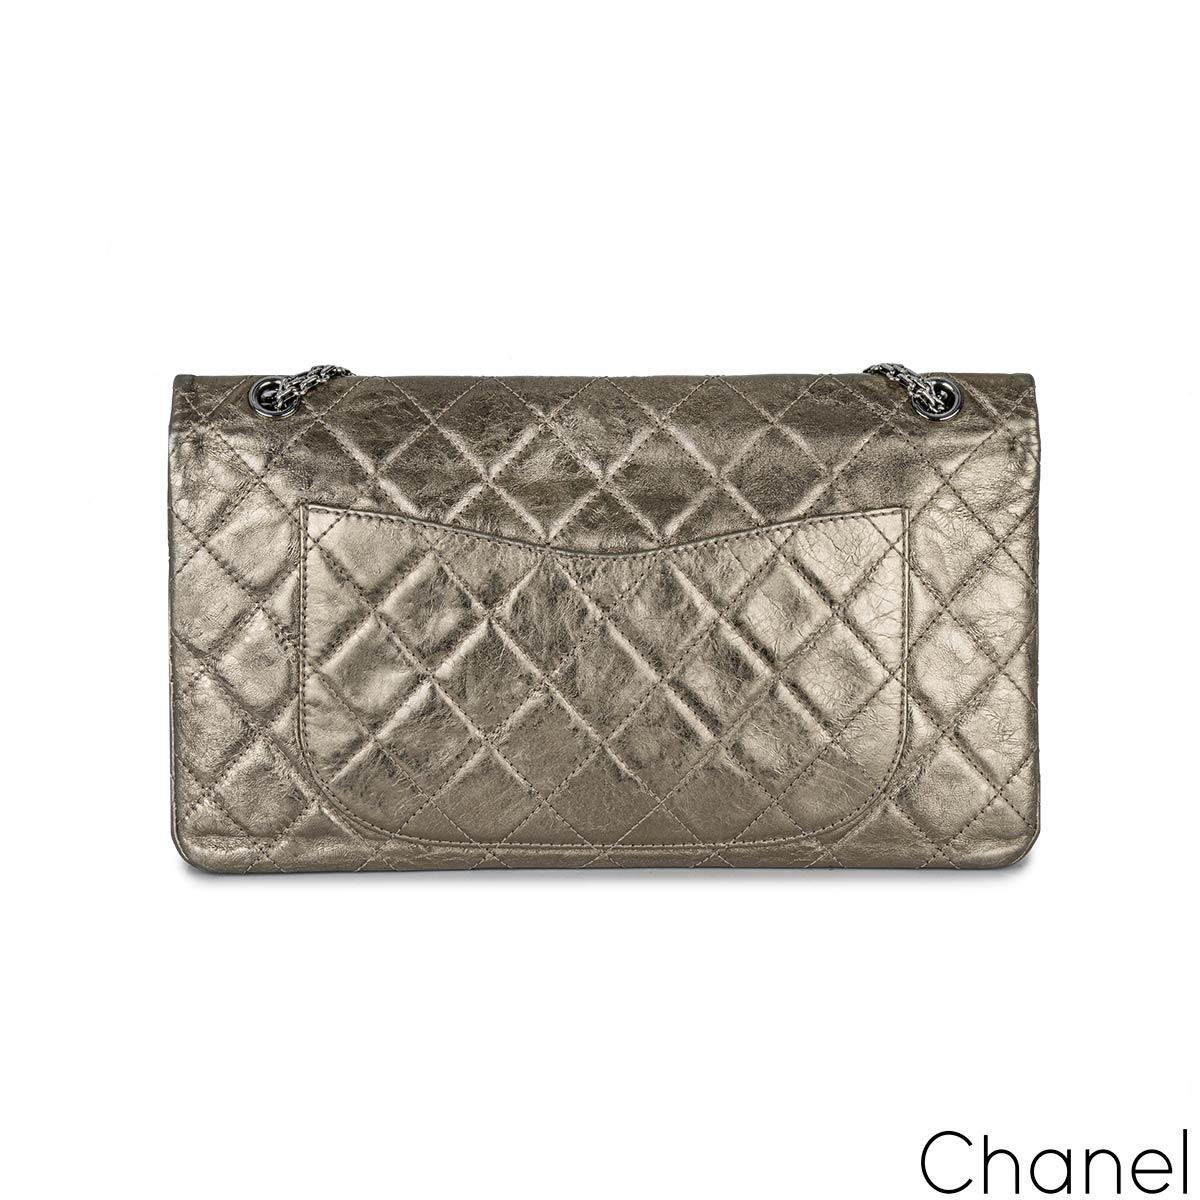 A Chic Chanel 2.55 Reissue Maxi Double Flap Handbag. The exterior of this reissue 2.55 is crafted in metallic champagne lambskin leather with signature diamond stitching and dark silver hardware. It features a front flap, a mademoiselle turn lock